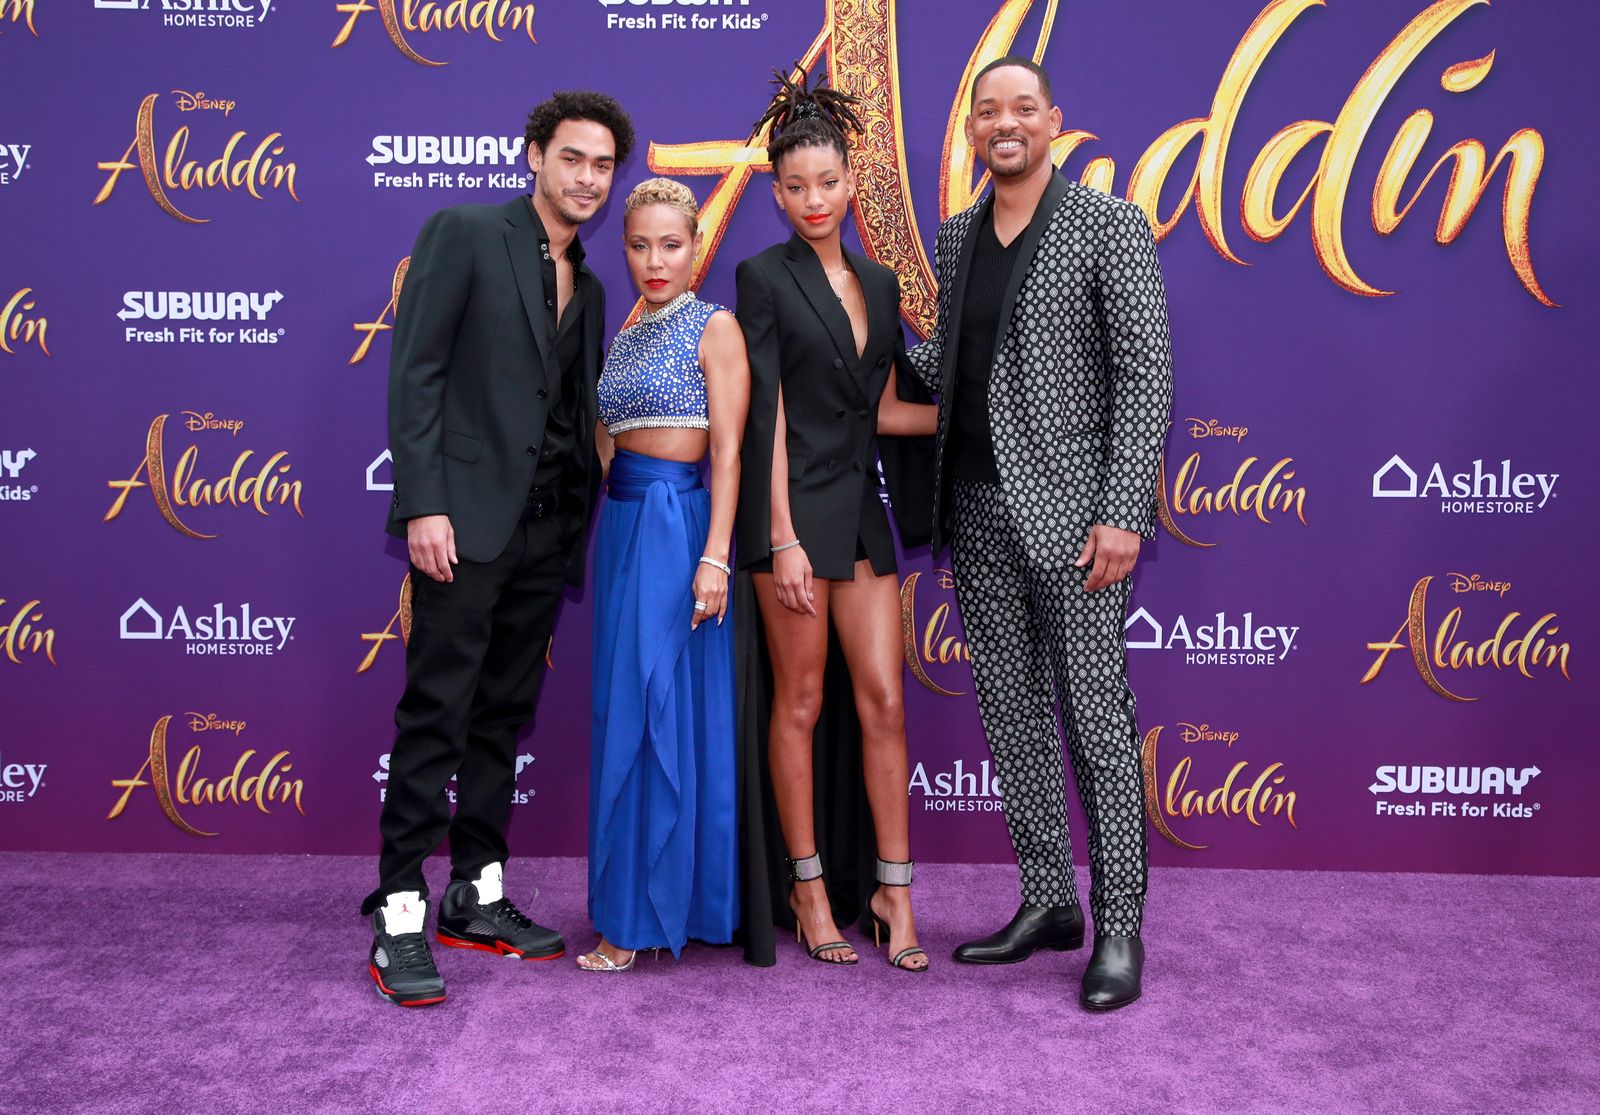 (L-R) Trey Smith, Jada Pinkett Smith, Willow Smith, and Will Smith attend the premiere of Disney's "Aladdin" on May 21, 2019 in Los Angeles, California. | Getty Images